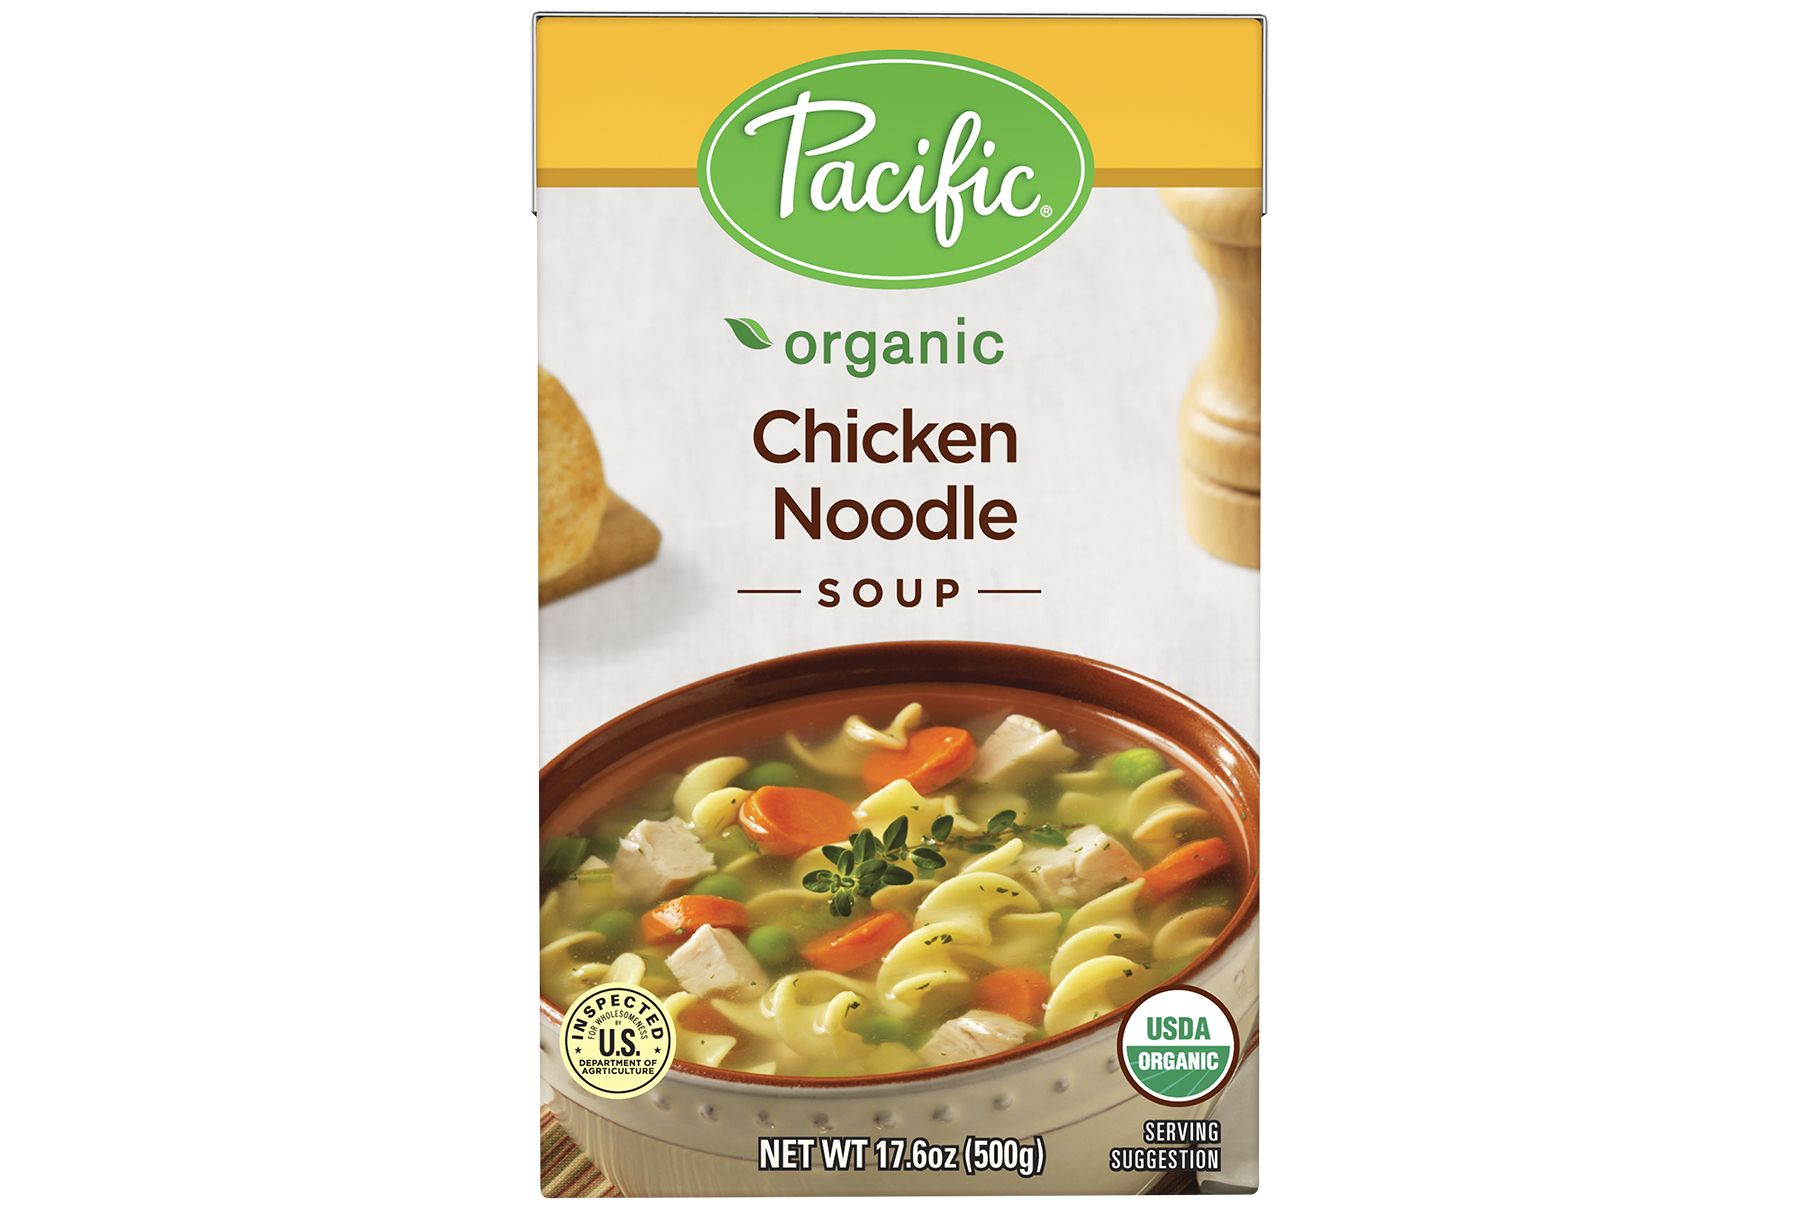 Pacific Foods Organic Chicken Noodle Σούπα